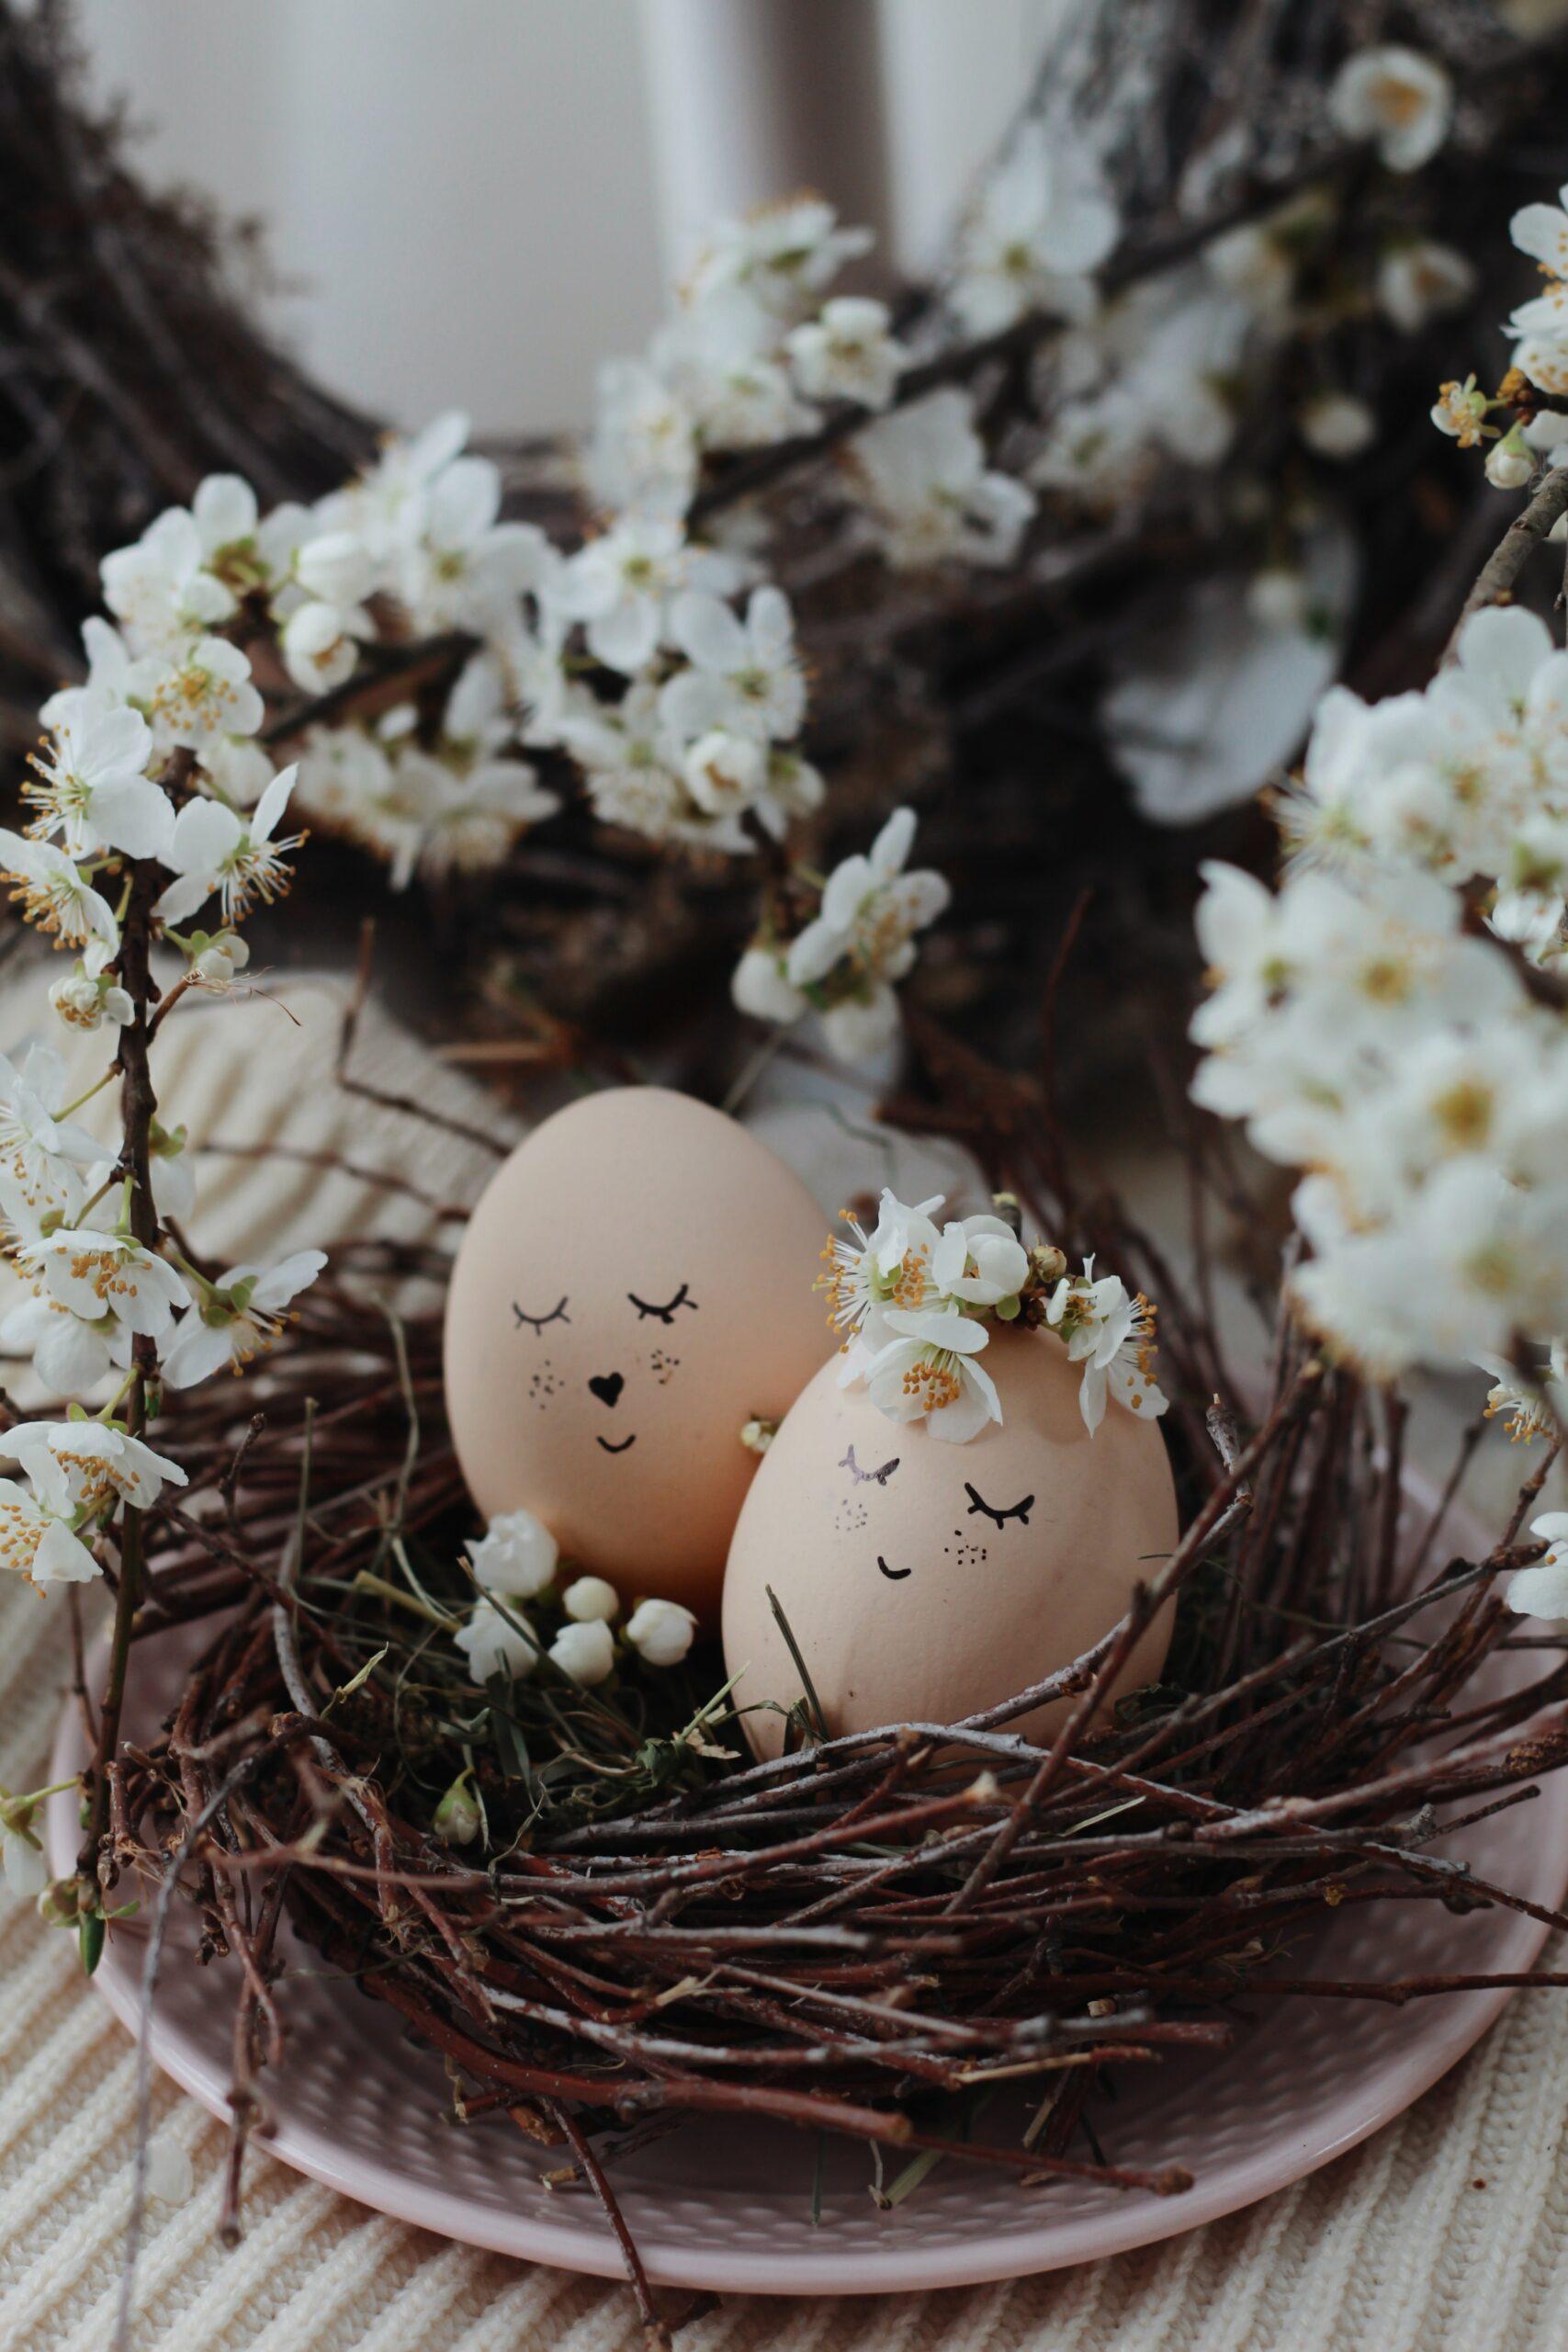 Two brown eggs with faces on them. They look like a boy and a girl (the girl has a flower crown). The eggs are sitting in a basket made of sticks